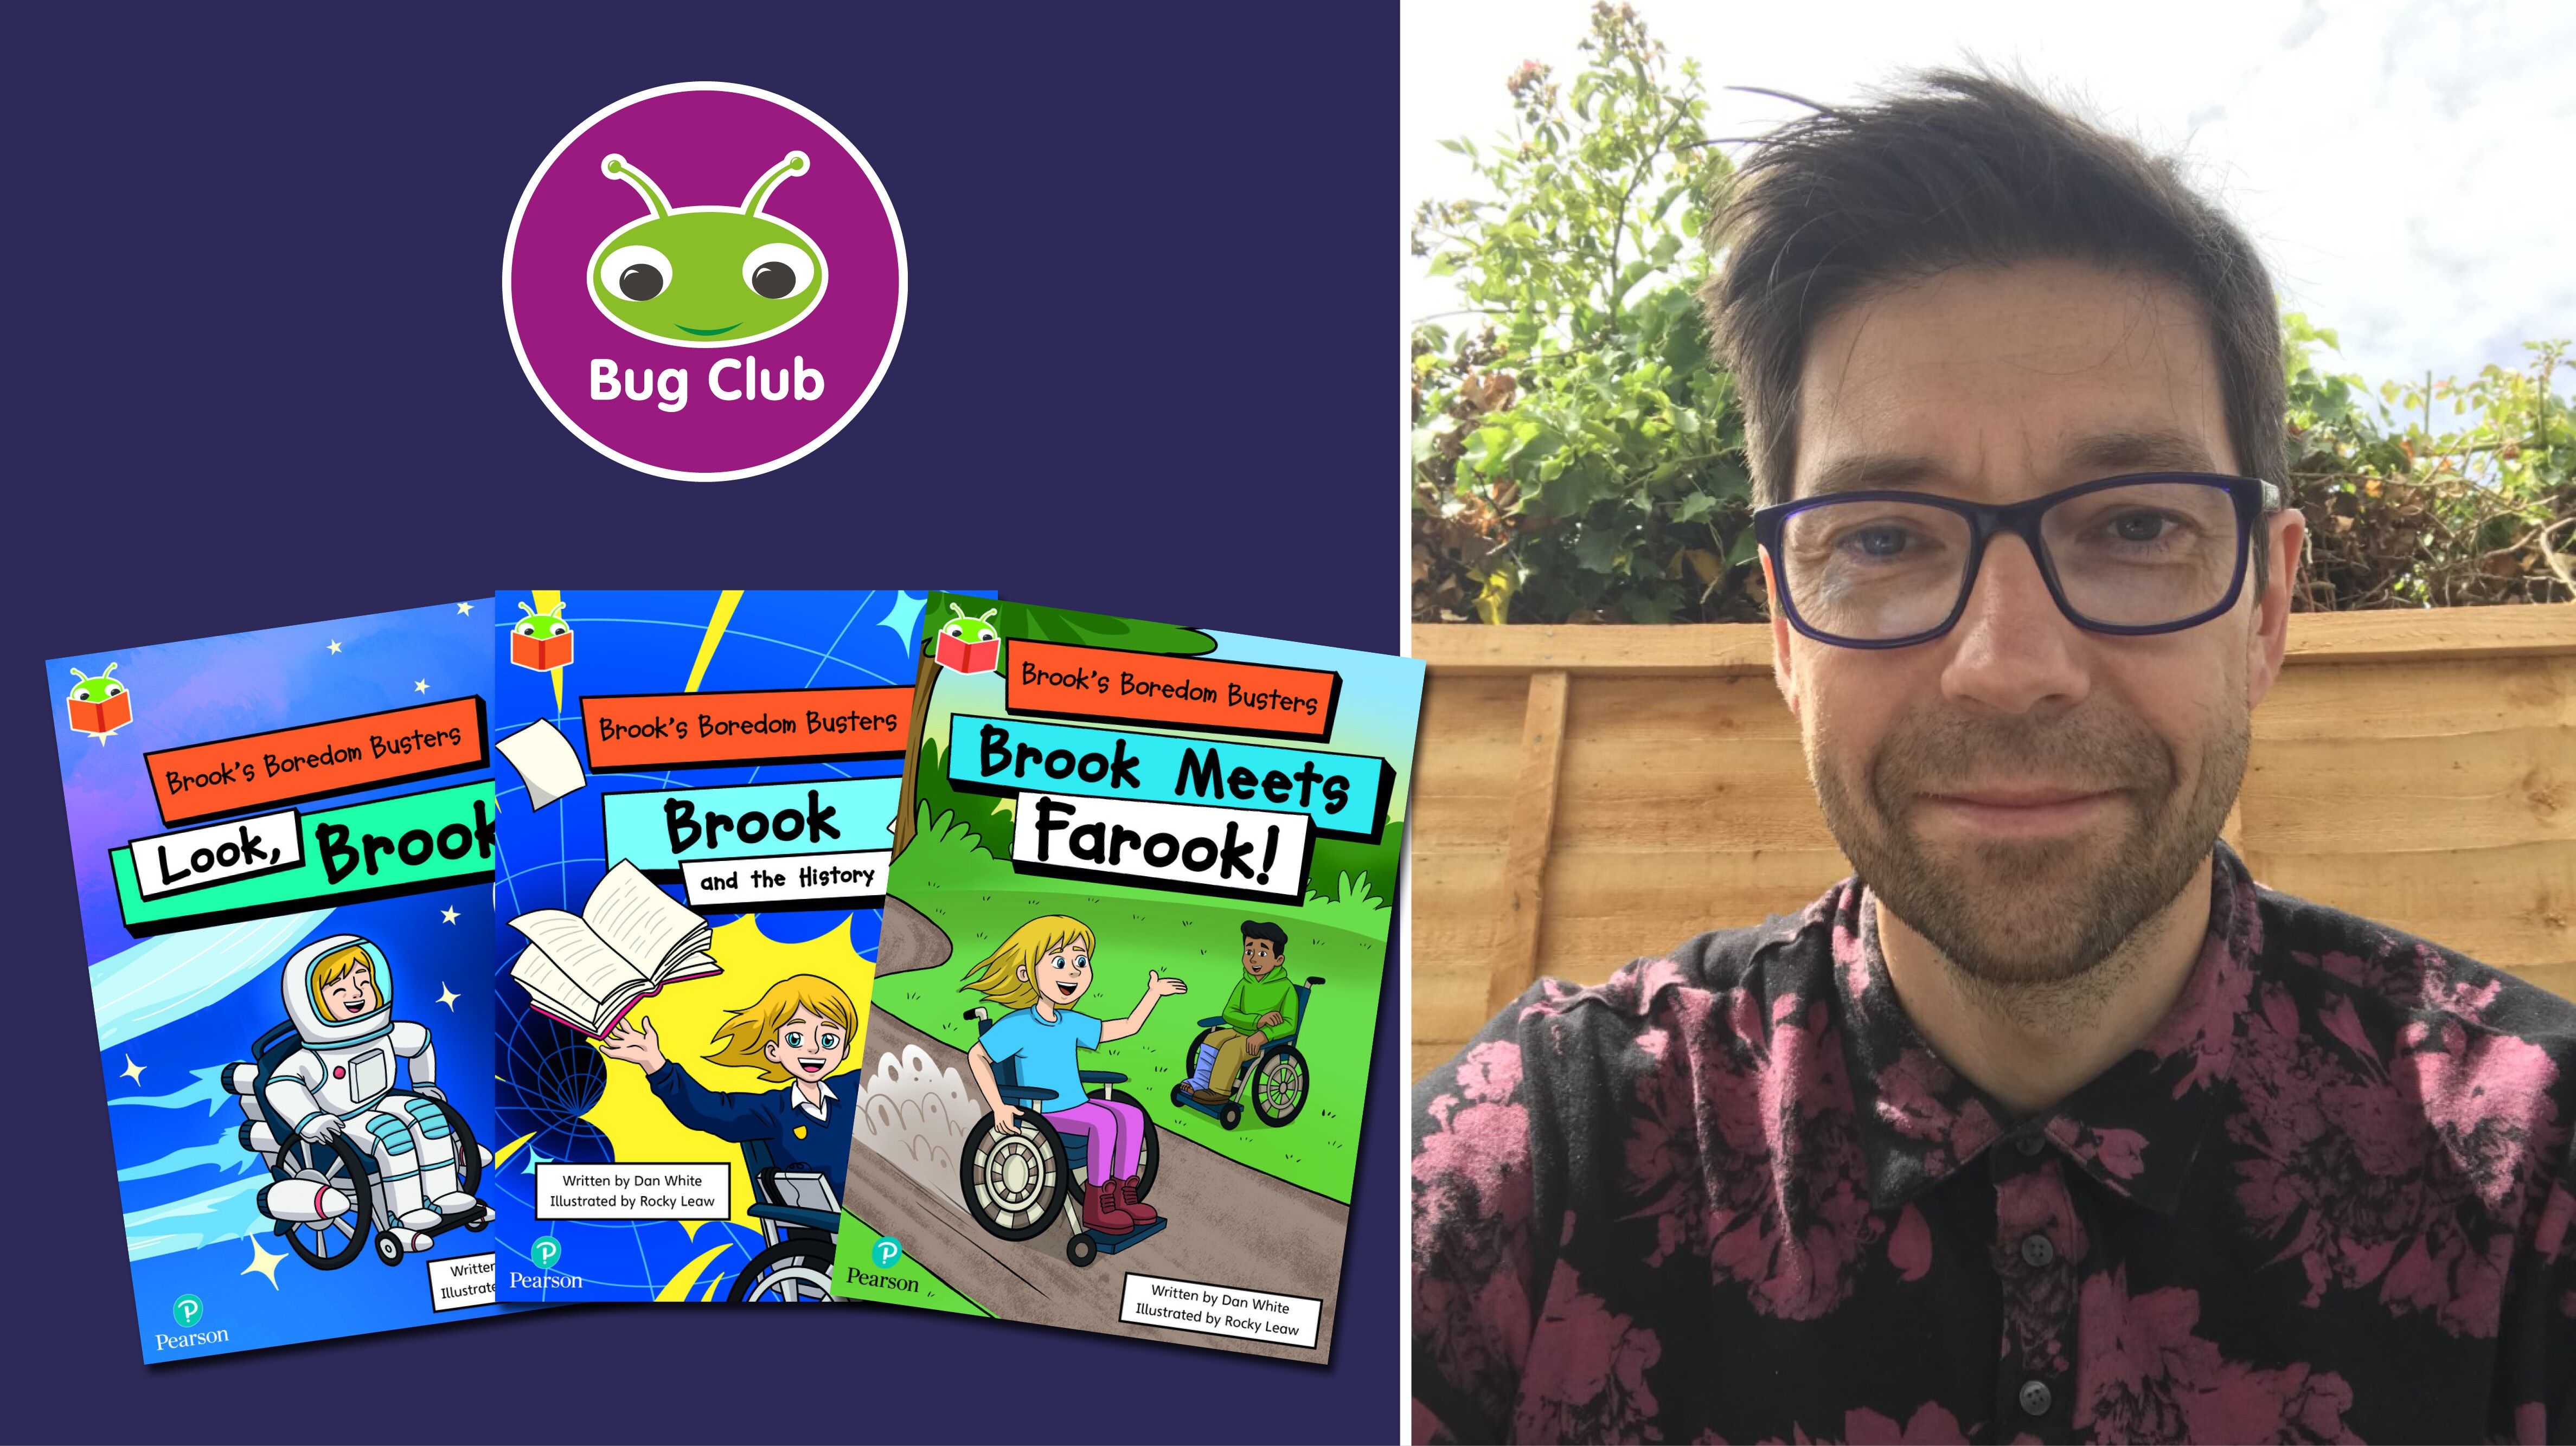 A picture of Dan alongside the Bug Club logo and the Bug Club books he wrote